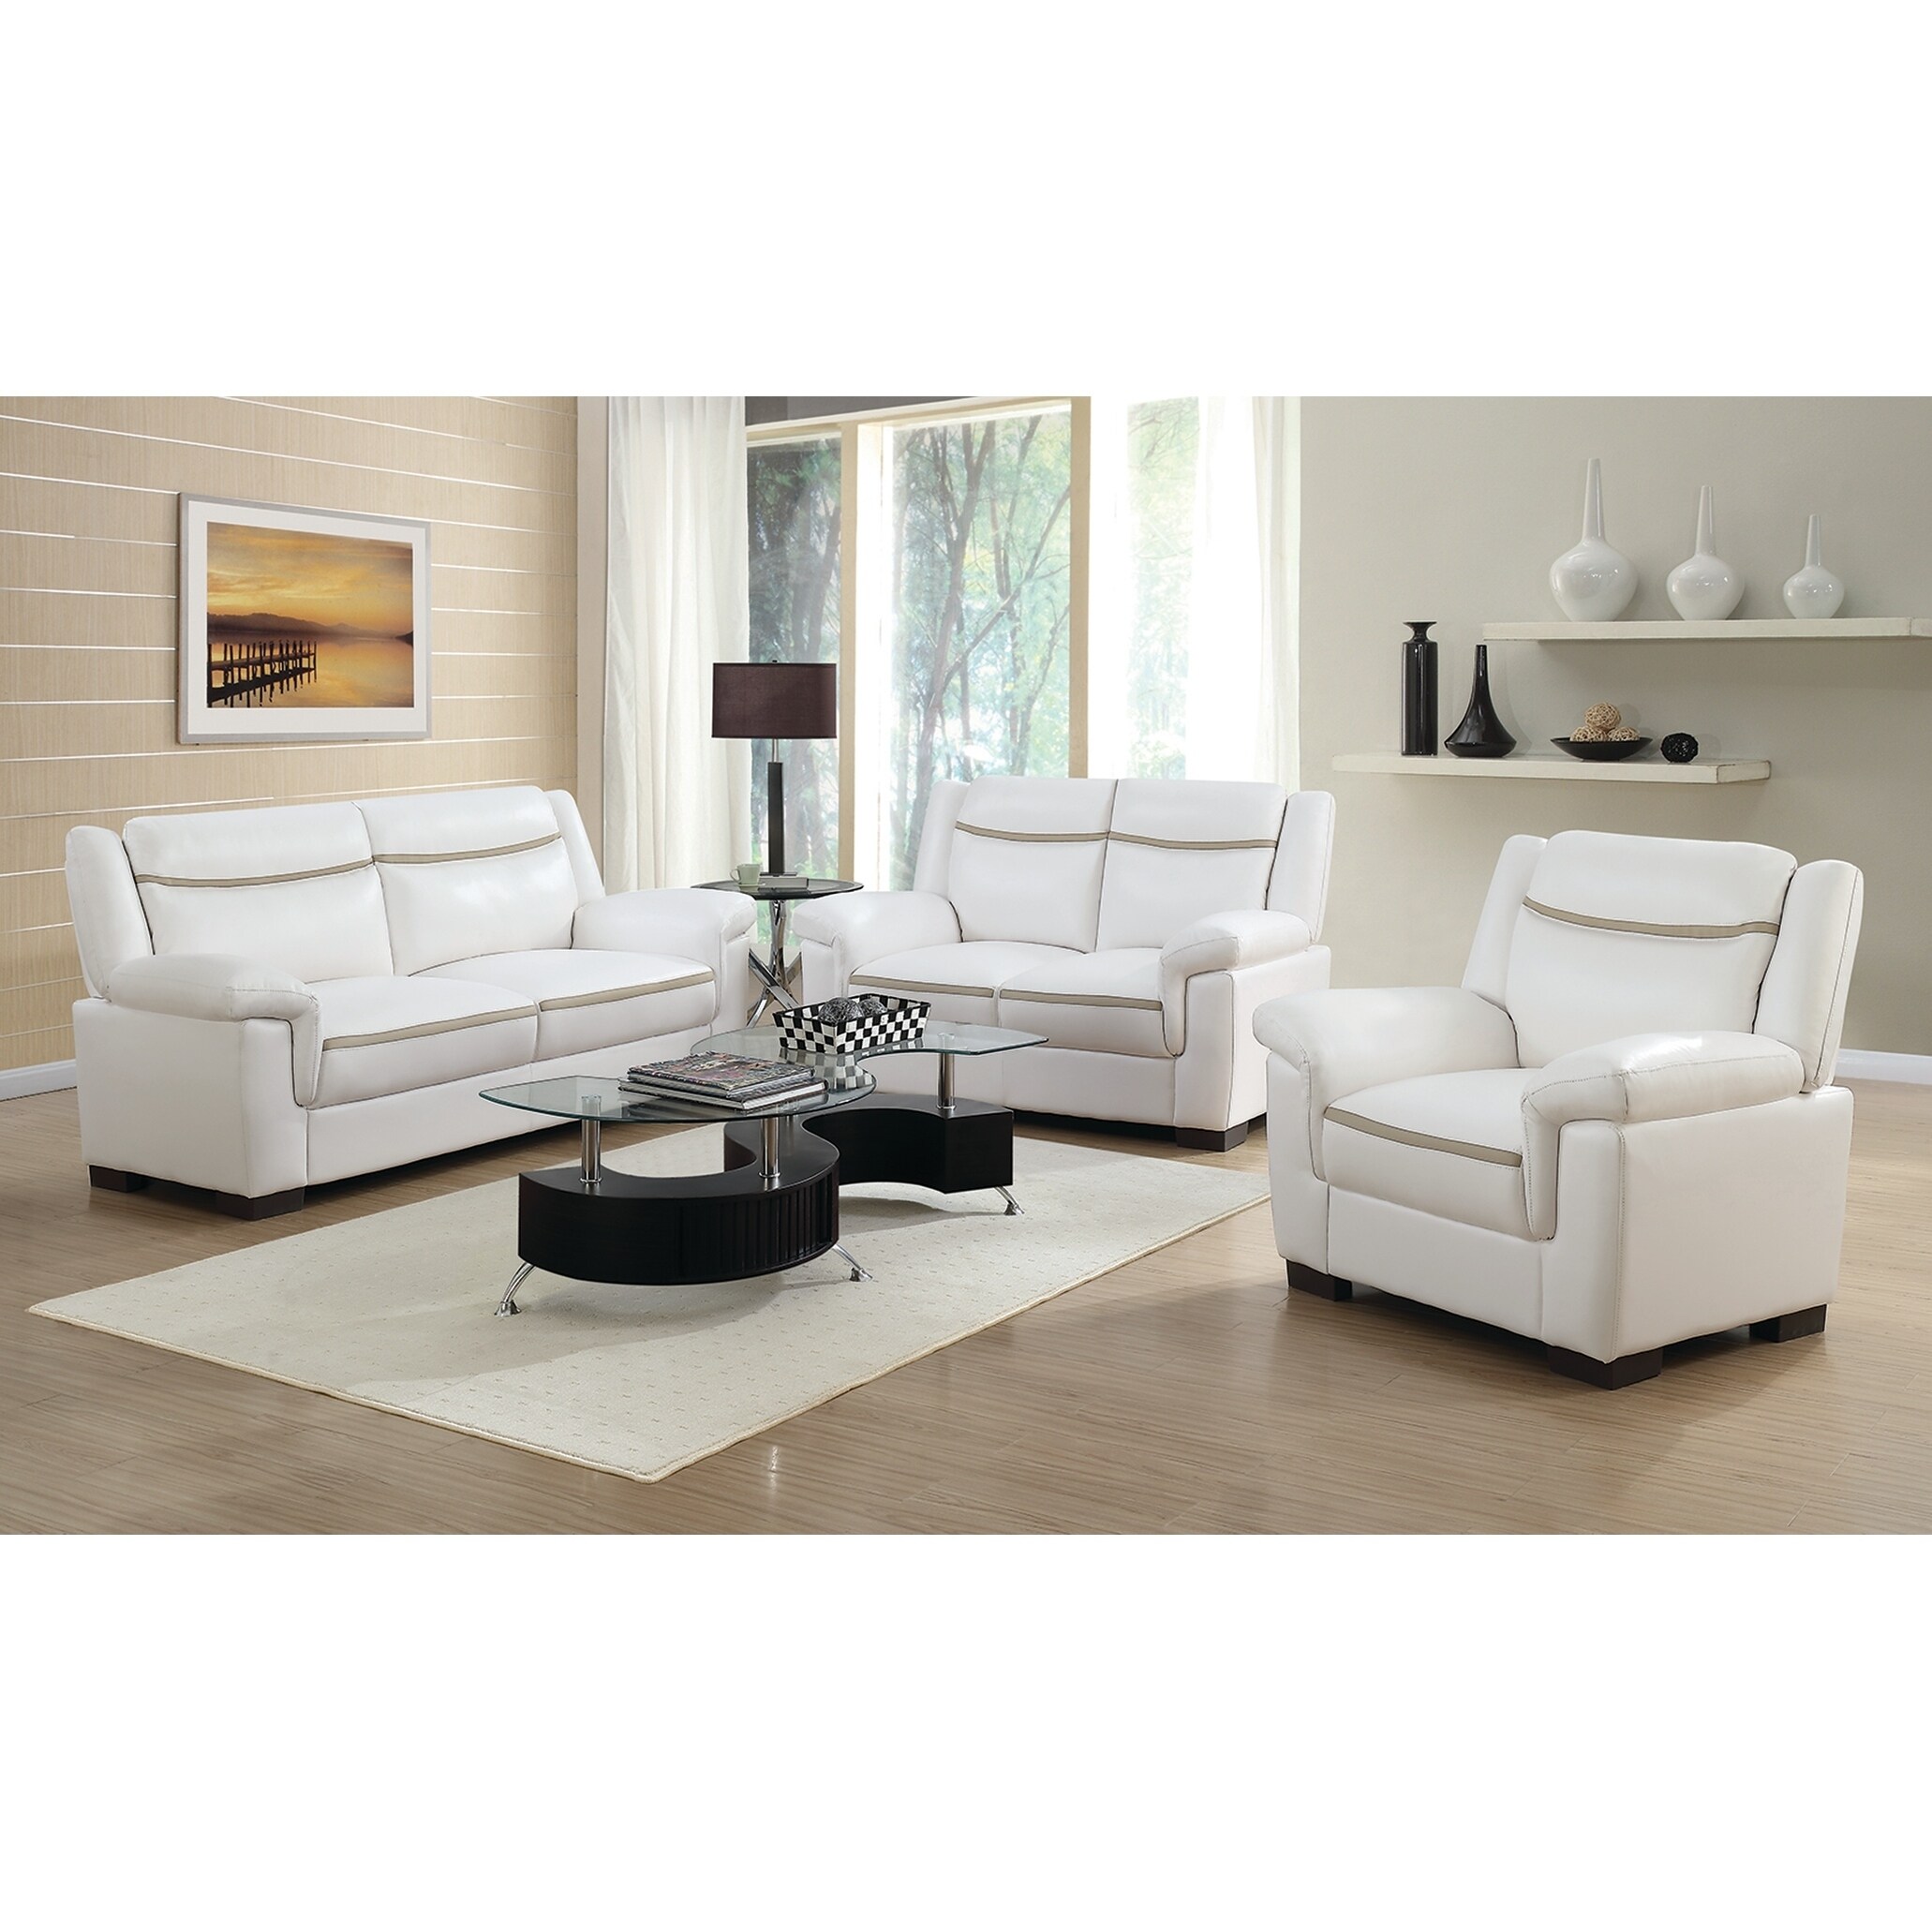 [View 27+] Modern Leather Living Room Furniture Sets